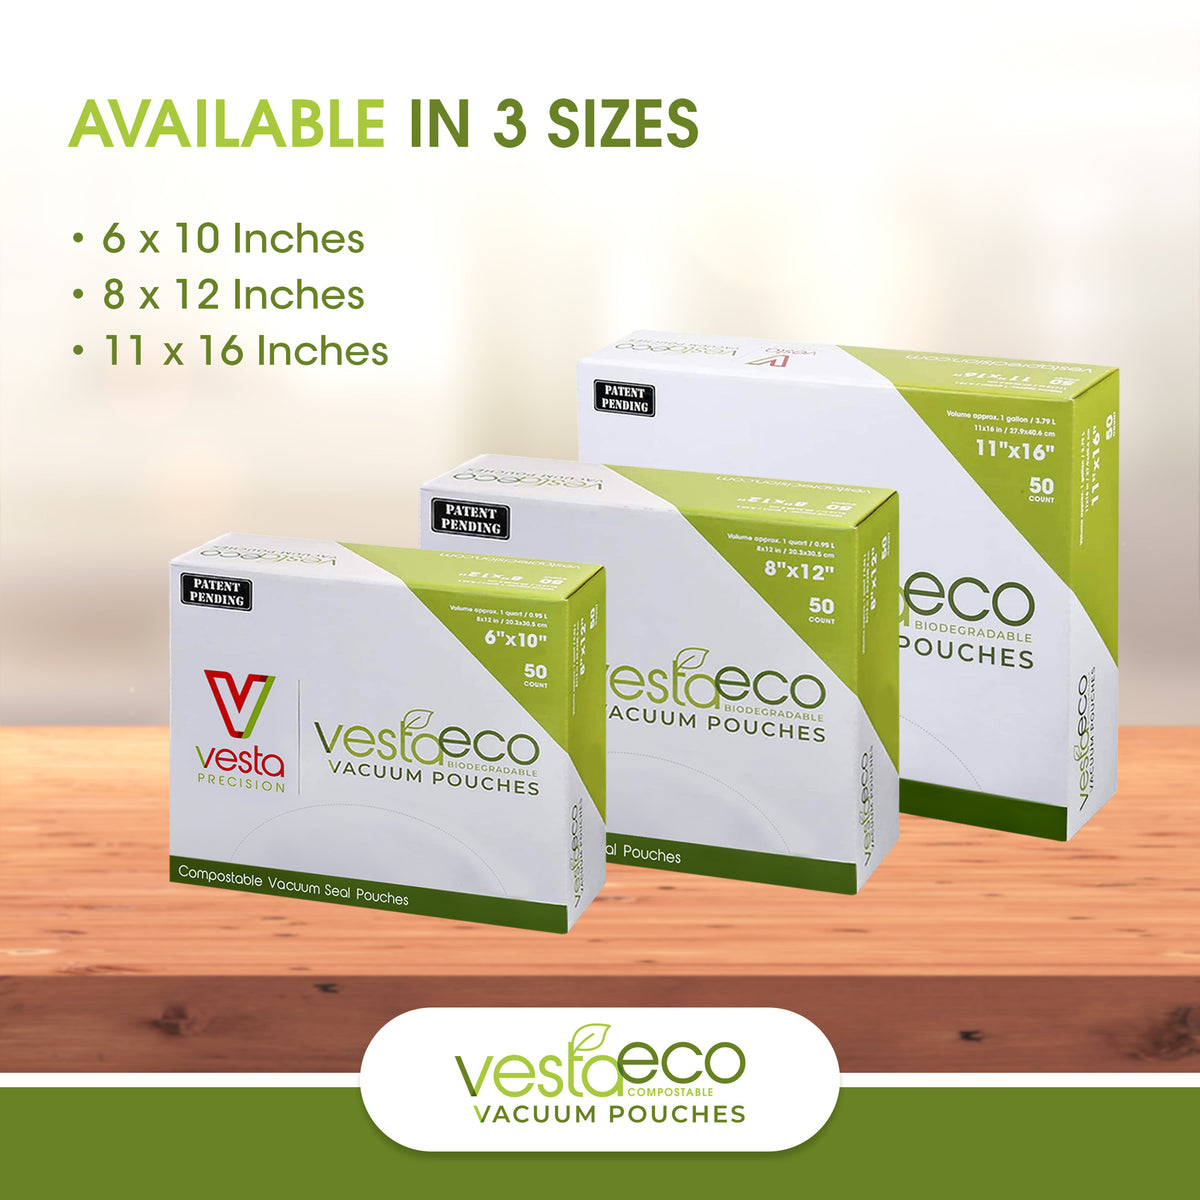 An infographic that shows the three sizes of VestaEco certified commercially compostable bags available - 6x10 inches, 8x12 inches, and 11x16 inches.